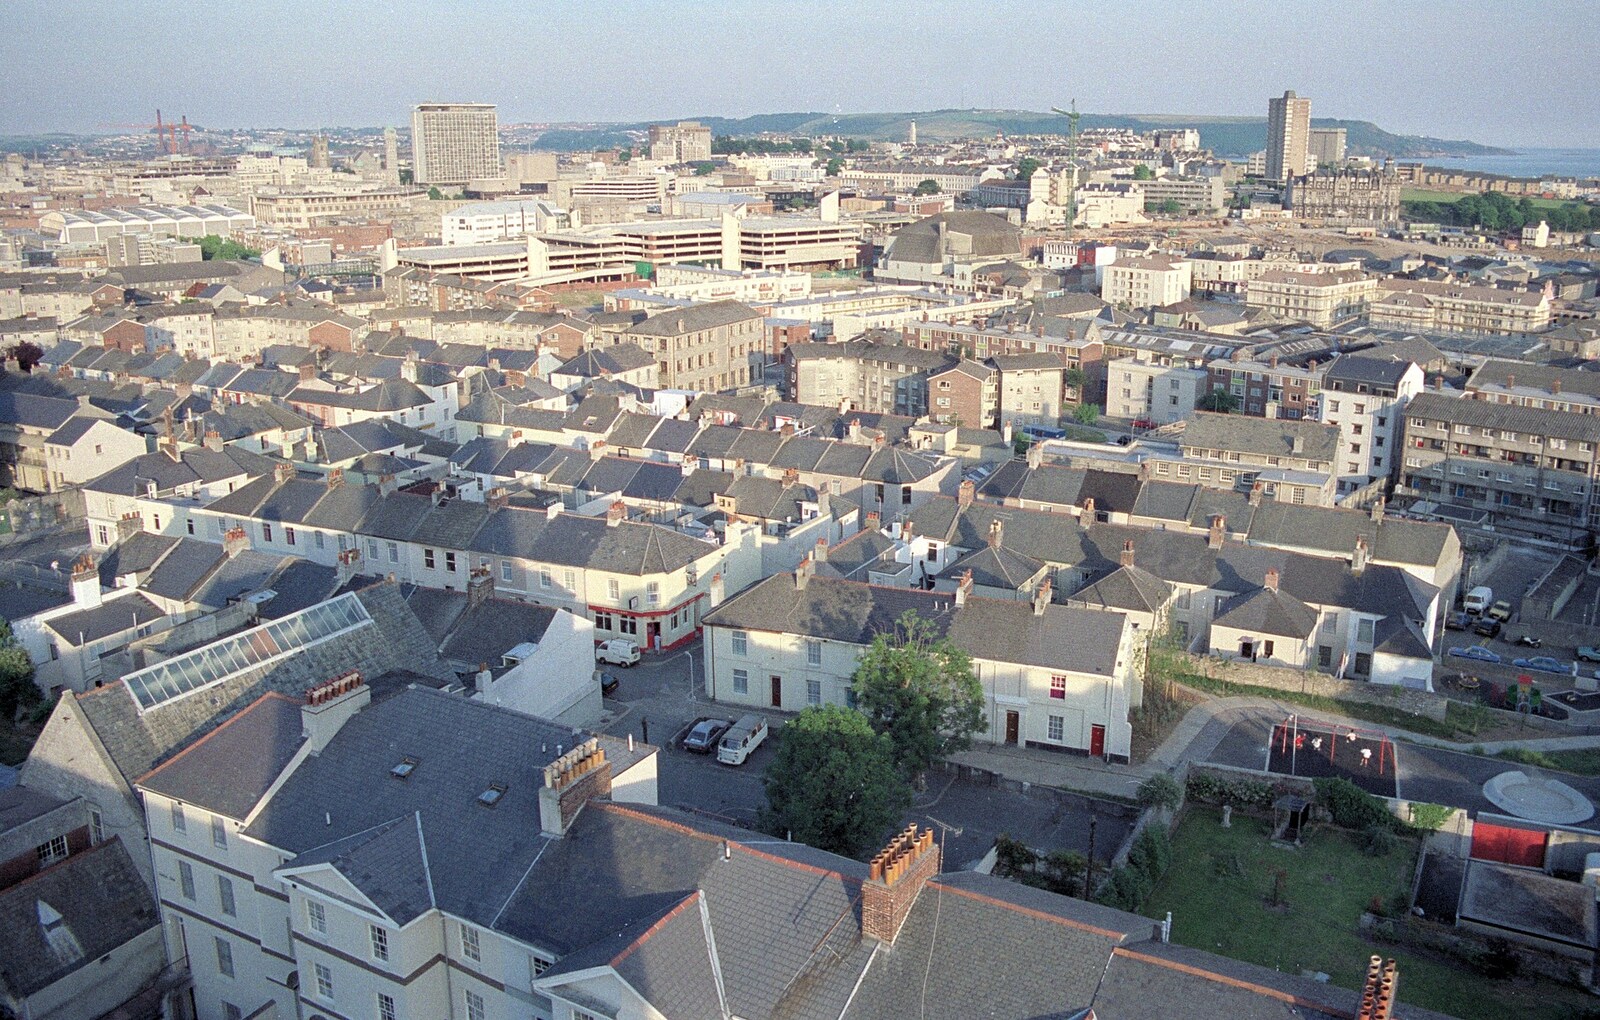 The view towards the middle of town from Uni: Views From St. Peter's Church Tower, Wyndham Square, Plymouth, Devon - 15th June 1989